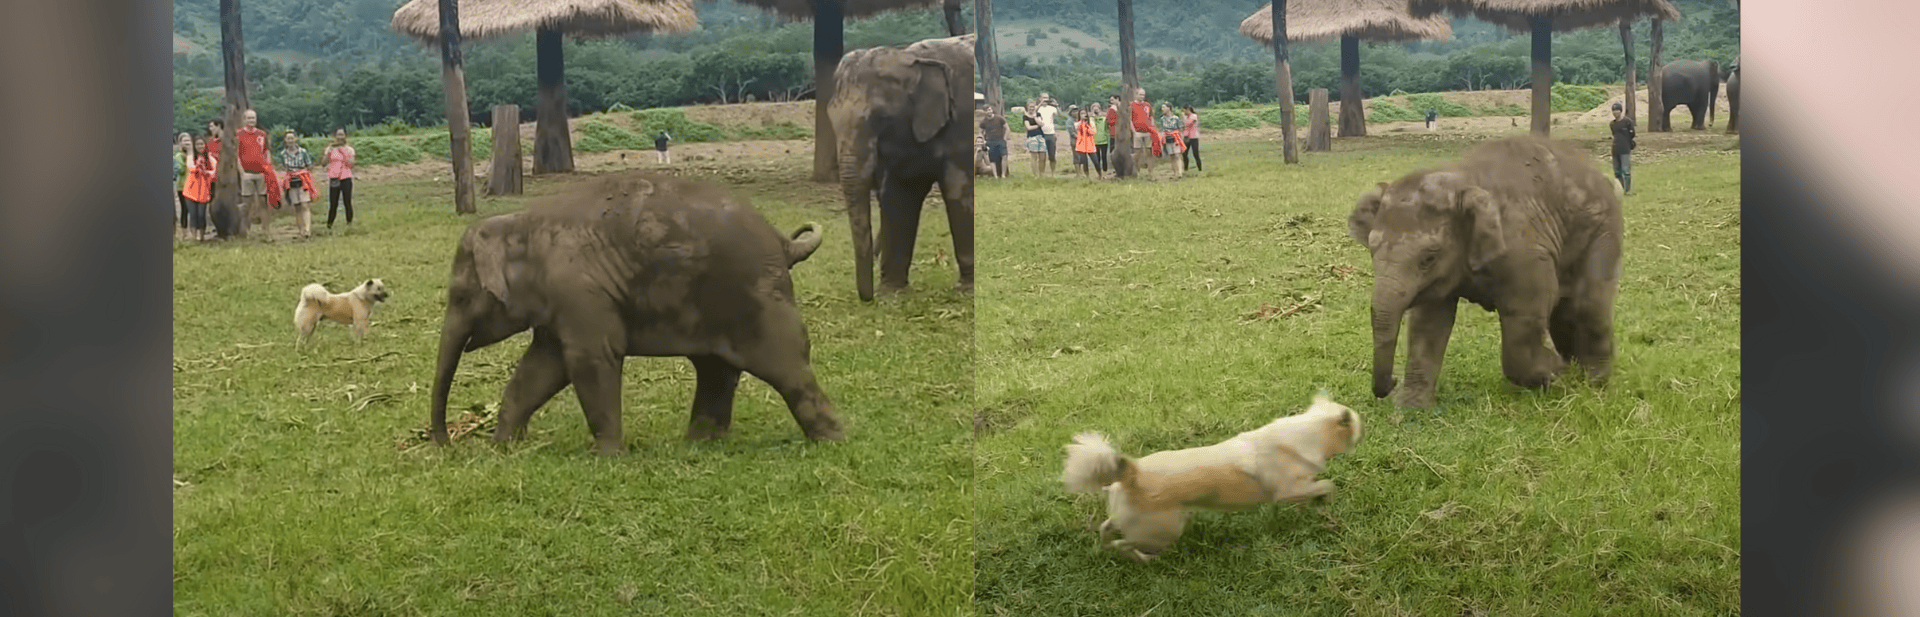 Watch a Spirited Puppy Dodge the Playful Advances of a Determined Baby Elephant